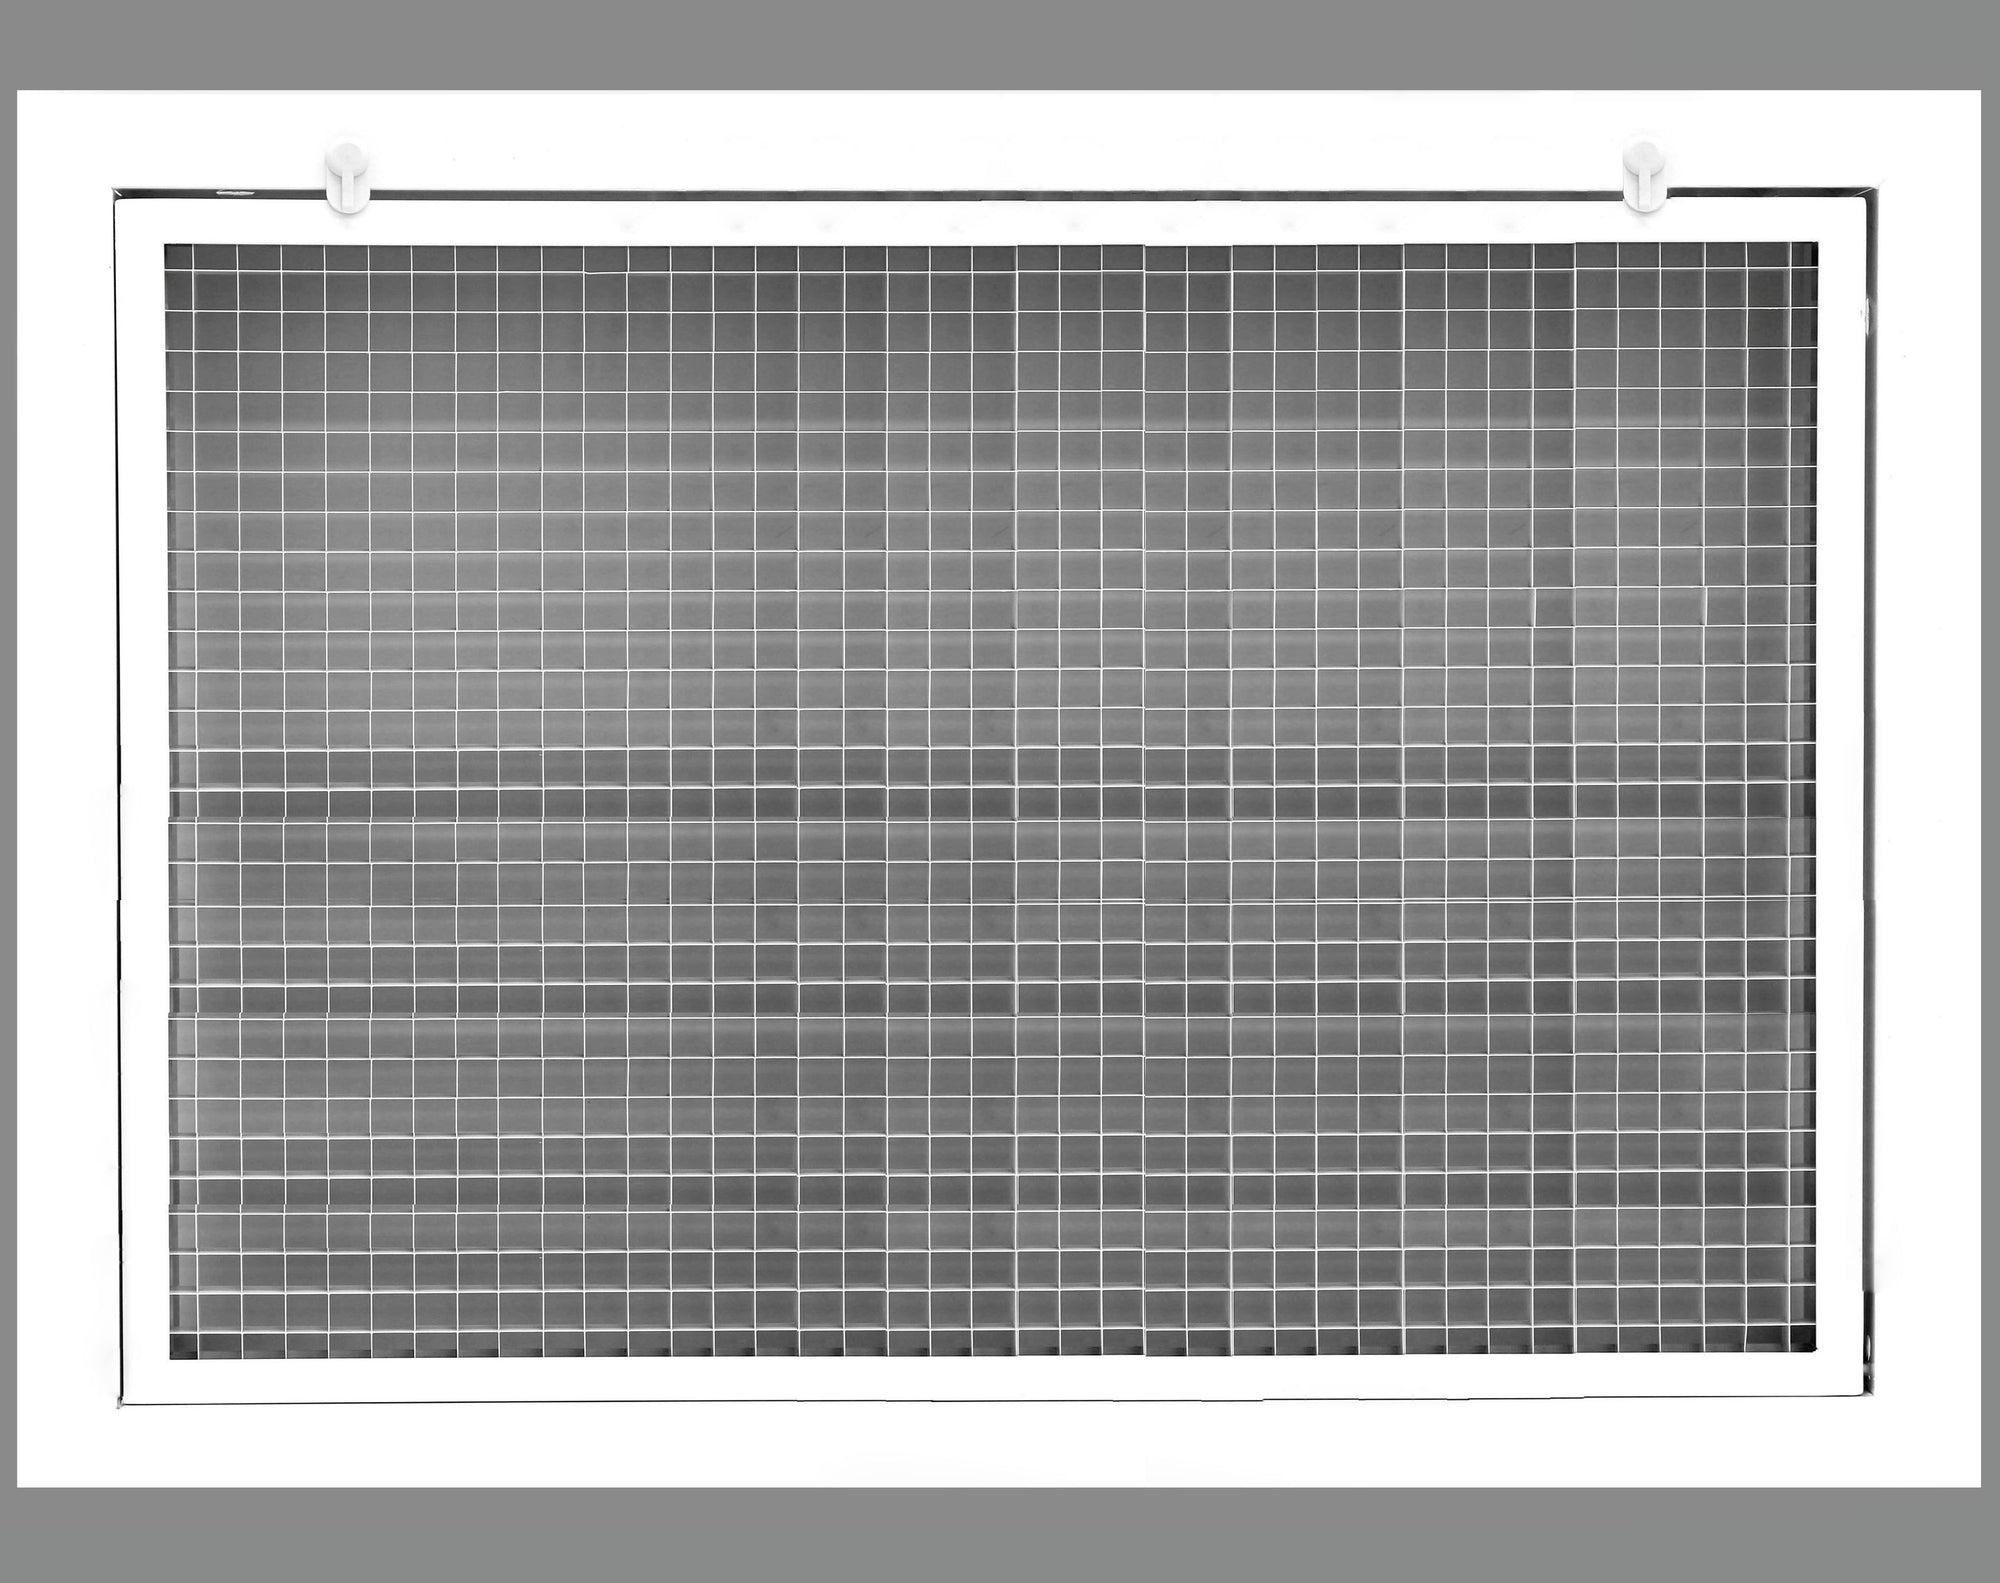 26" x 14" Cube Core Eggcrate Return Air Filter Grille for 1" Filter